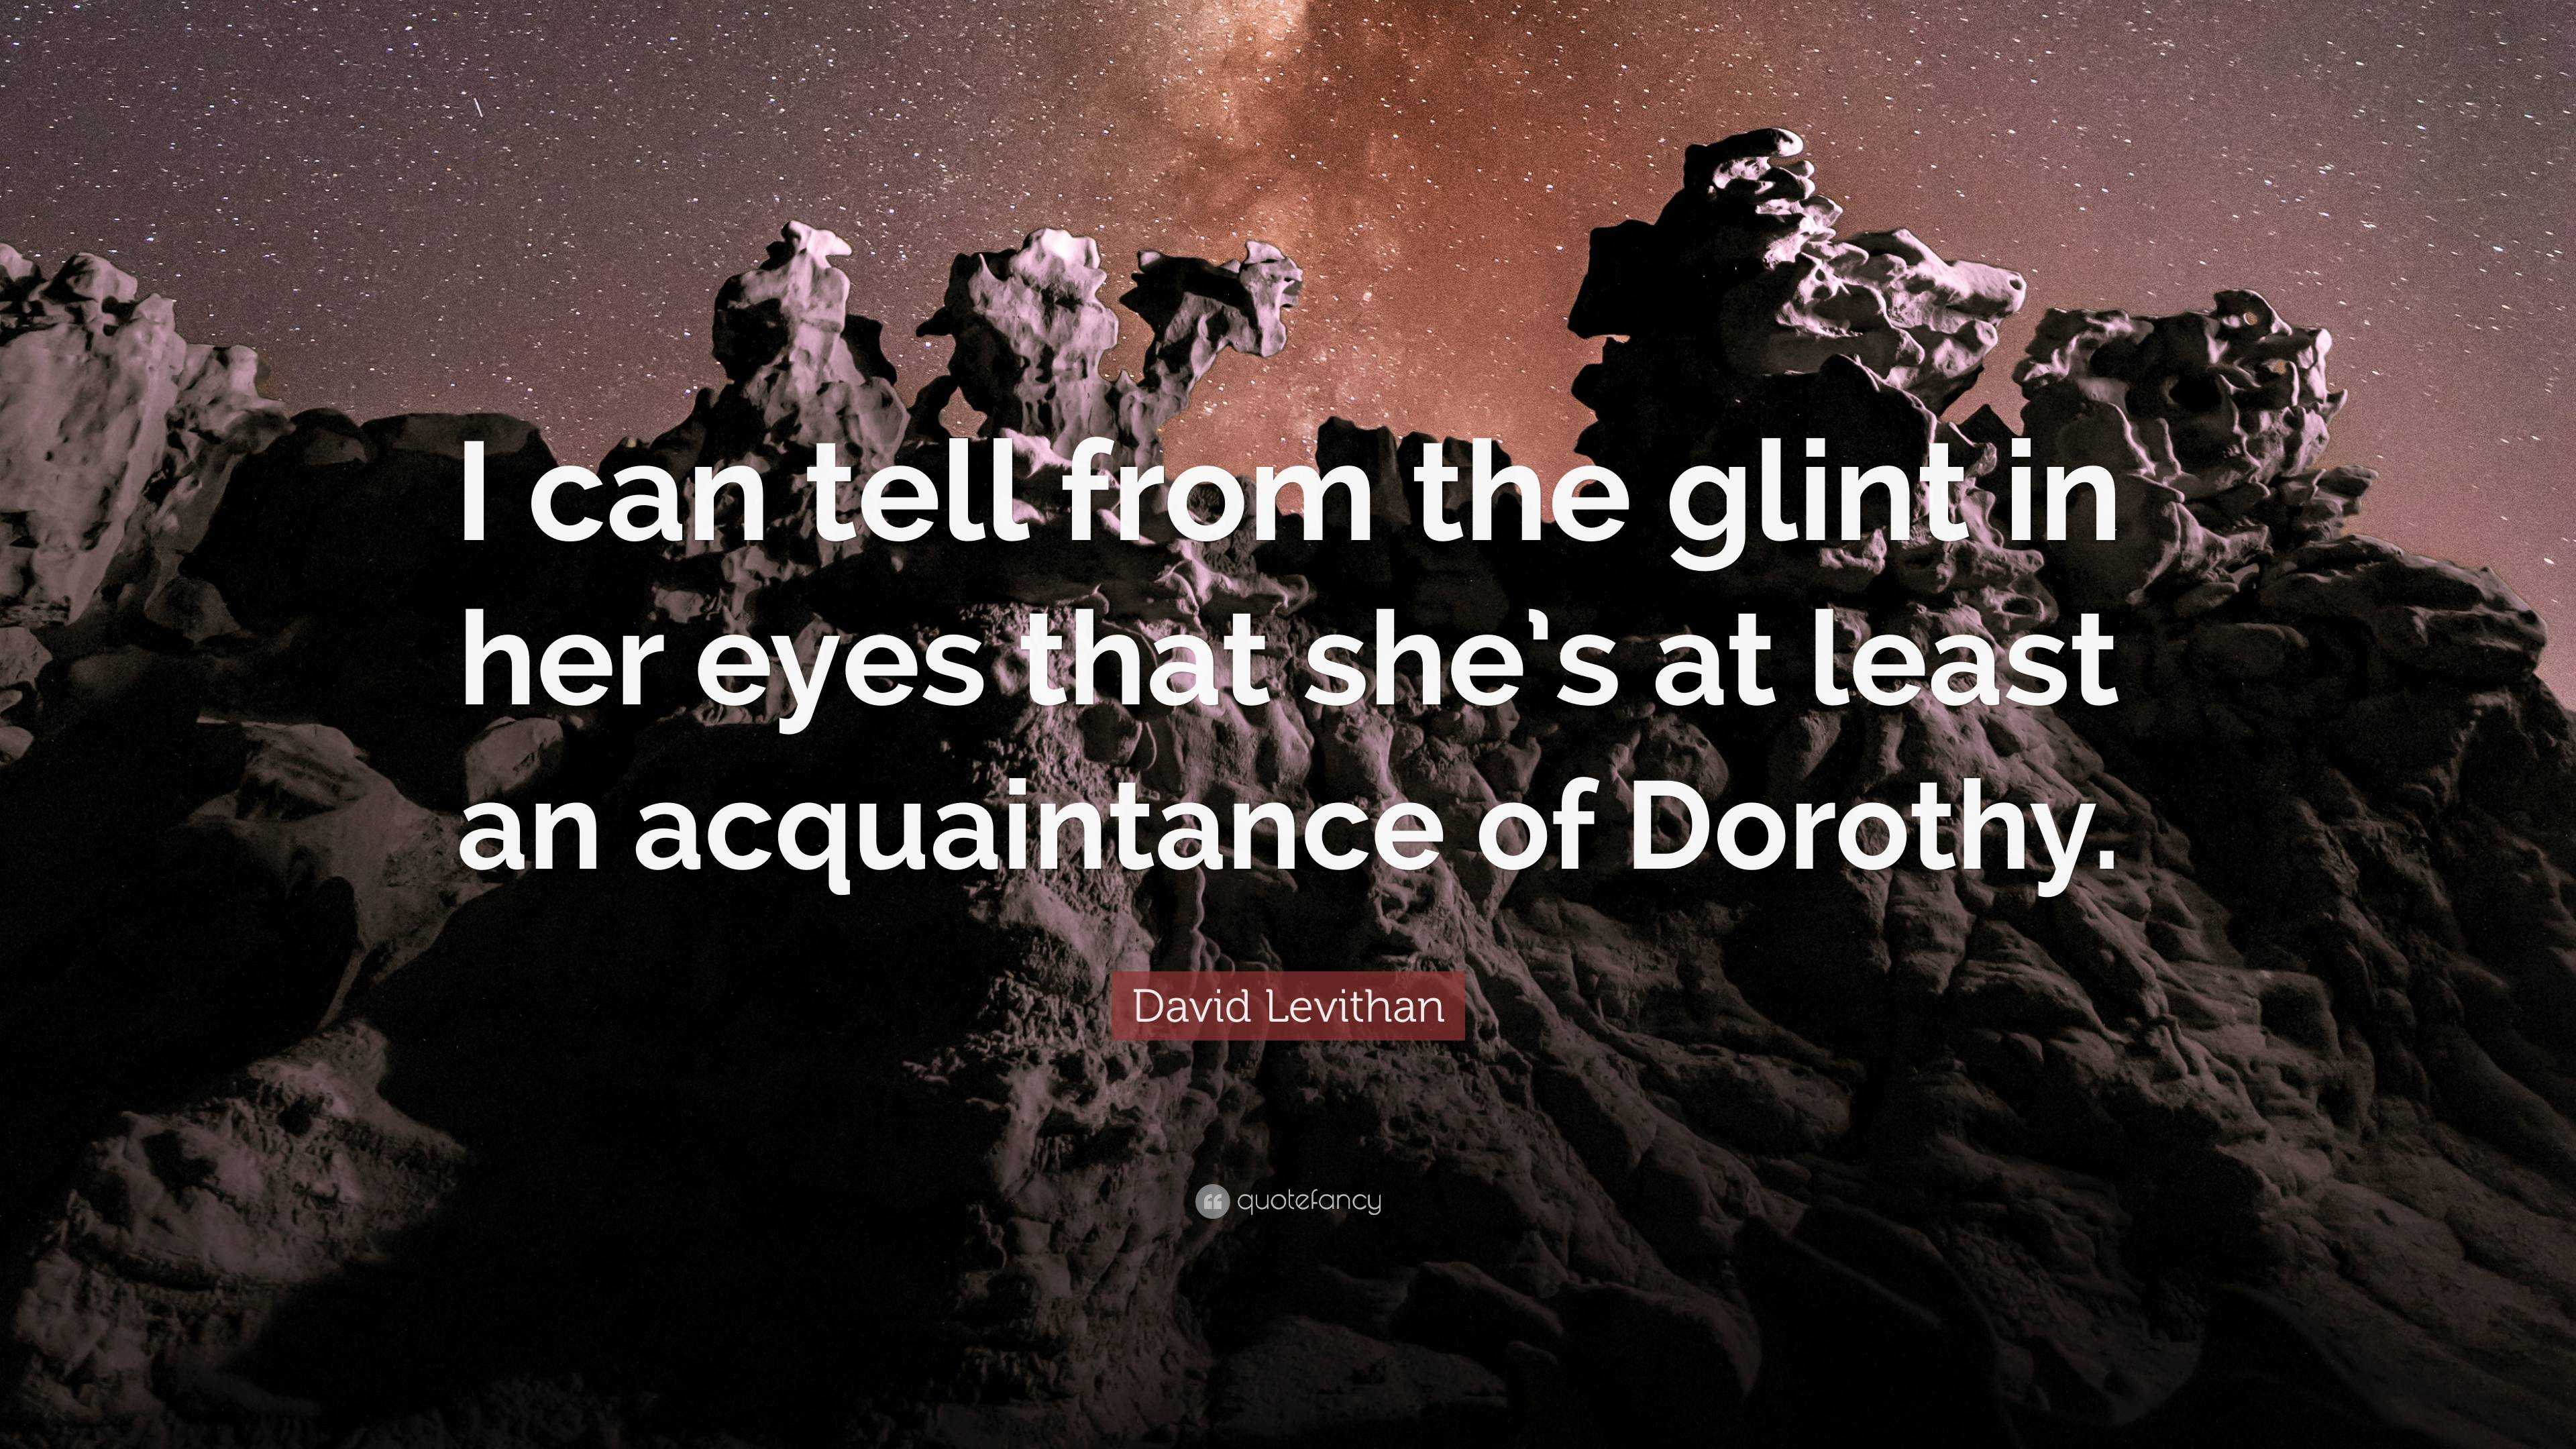 David Levithan Quote: “I can tell from the glint in her eyes that she’s ...